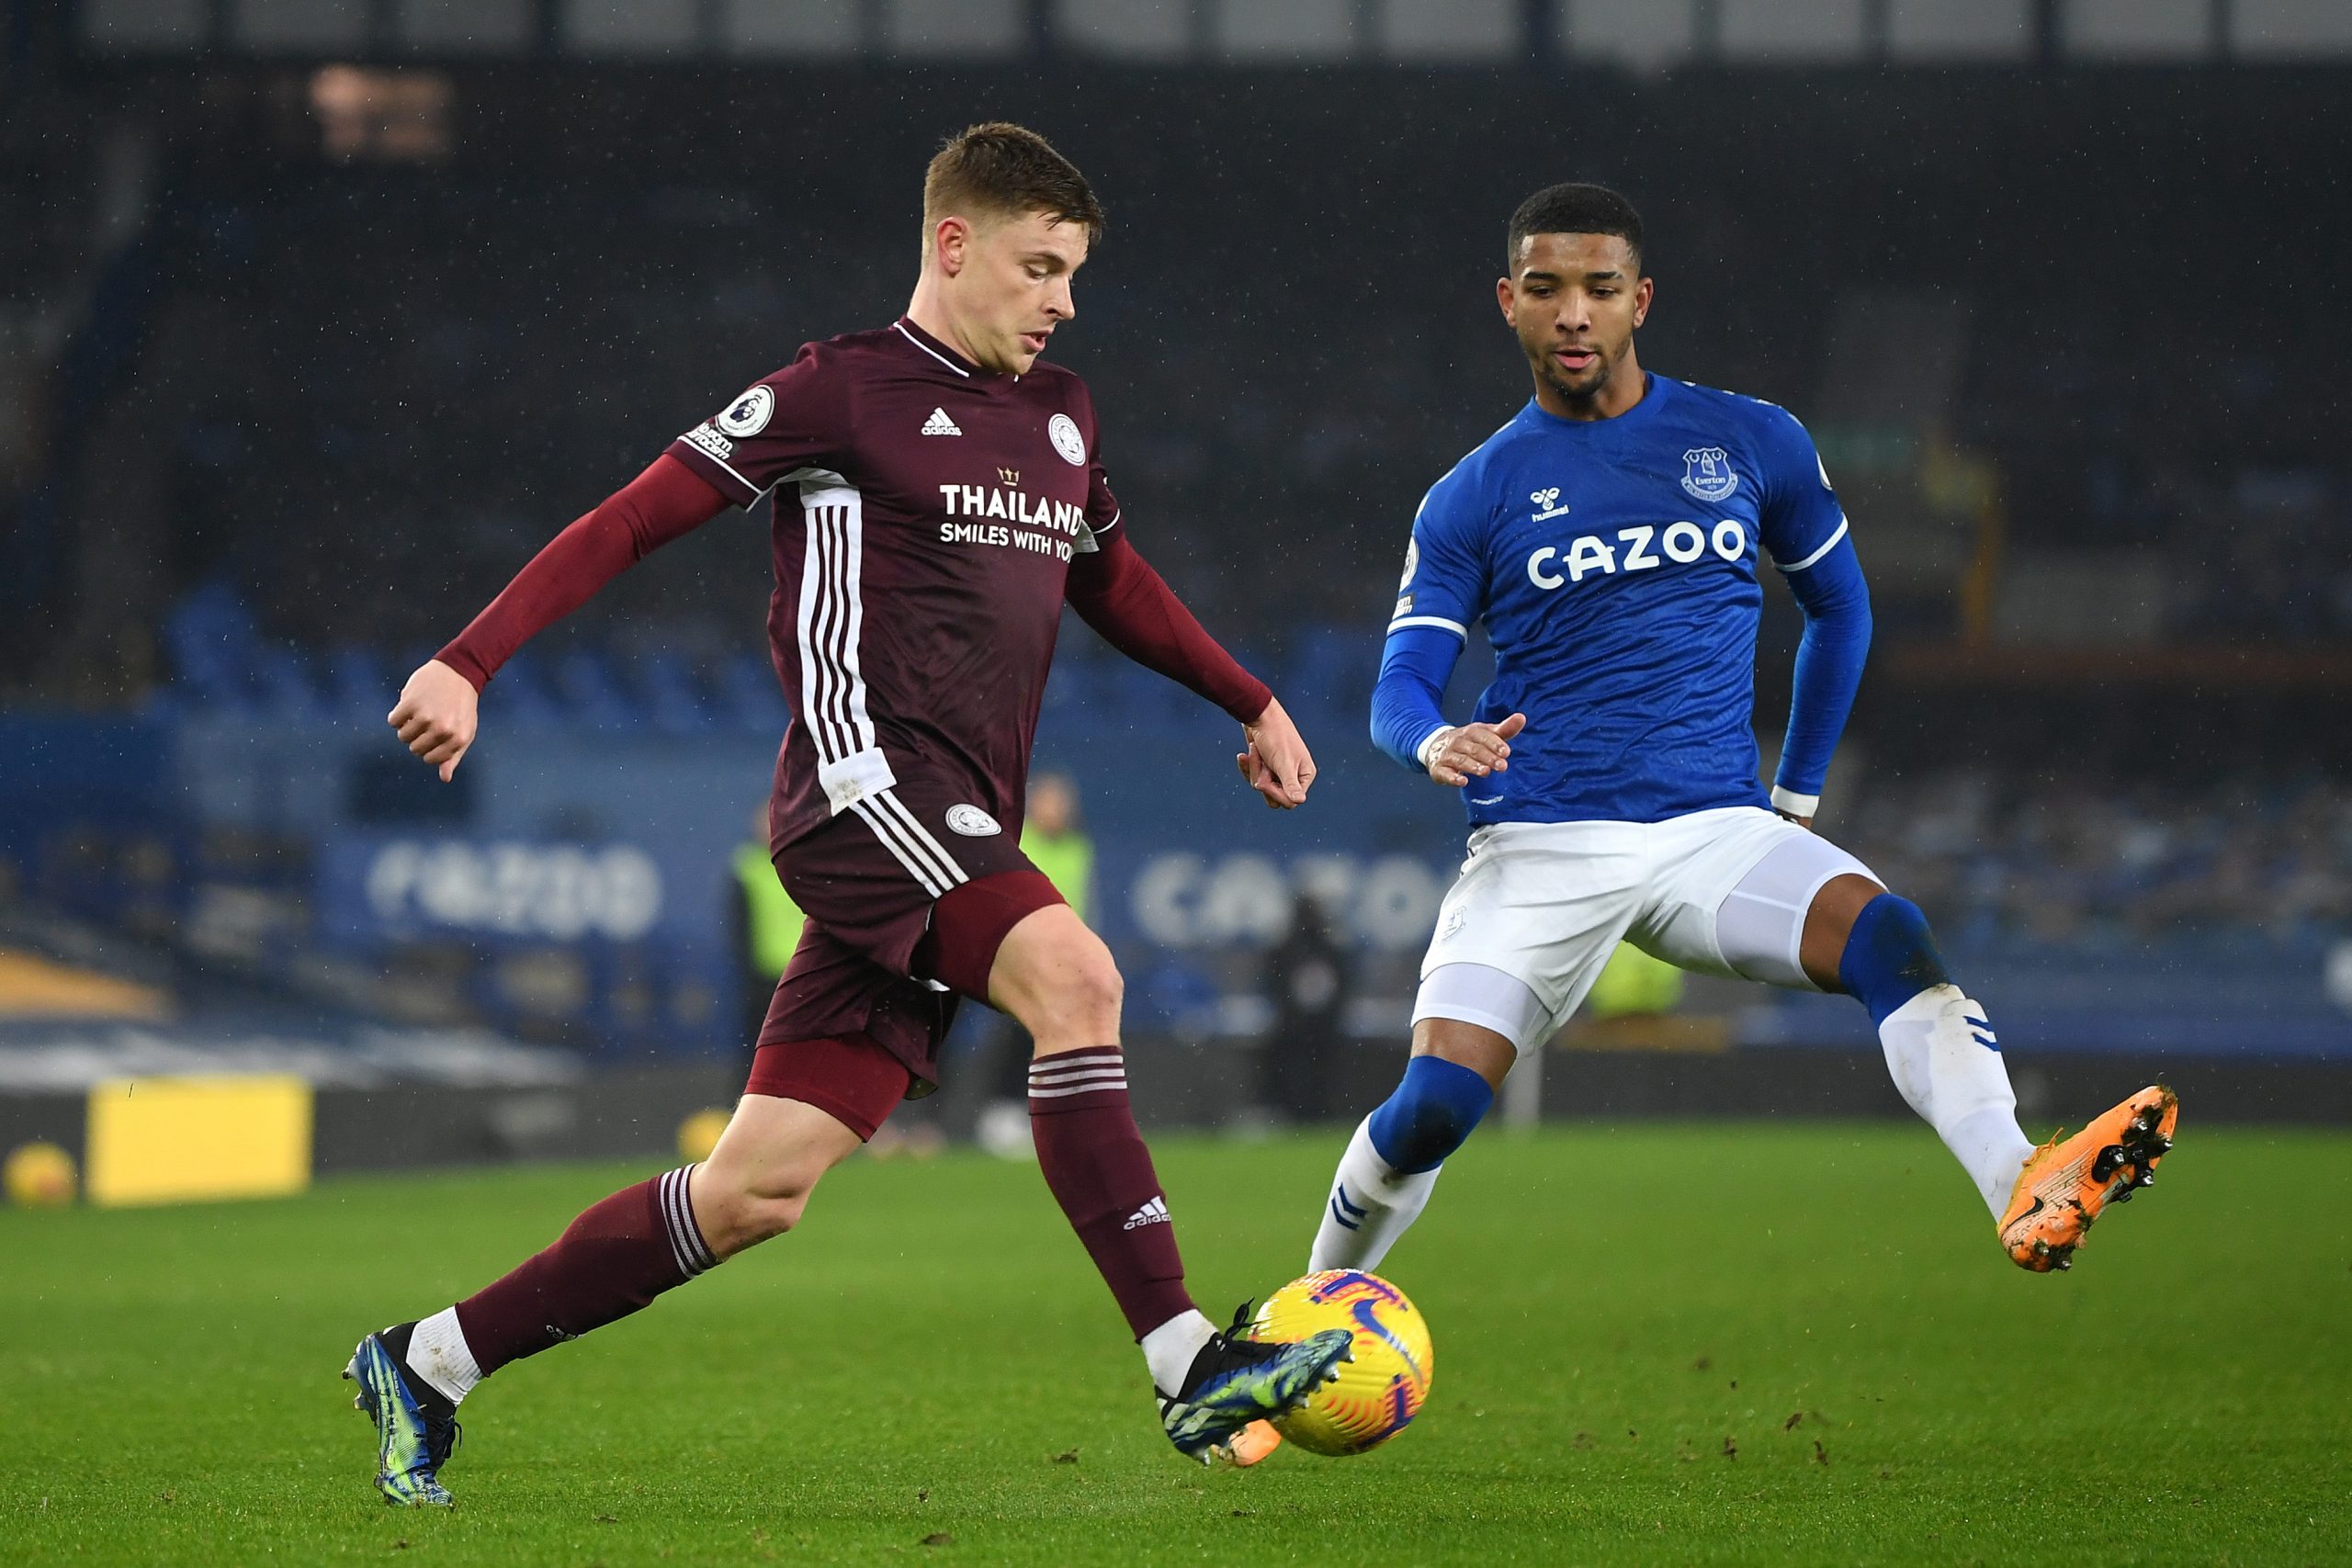 LIVERPOOL, ENGLAND - JANUARY 27: Harvey Barnes goes past Mason Holgate of Everton  during the Premier League match between Everton and Leicester City at Goodison Park on January 27, 2021 in Liverpool, England. Sporting stadiums around the UK remain under strict restrictions due to the Coronavirus Pandemic as Government social distancing laws prohibit fans inside venues resulting in games being played behind closed doors. (Photo by Michael Regan/Getty Images)The 4th Official uses images provided by the following image agency: Getty Images (https://www.gettyimages.de/) and Imago Images (https://www.imago-images.de/).